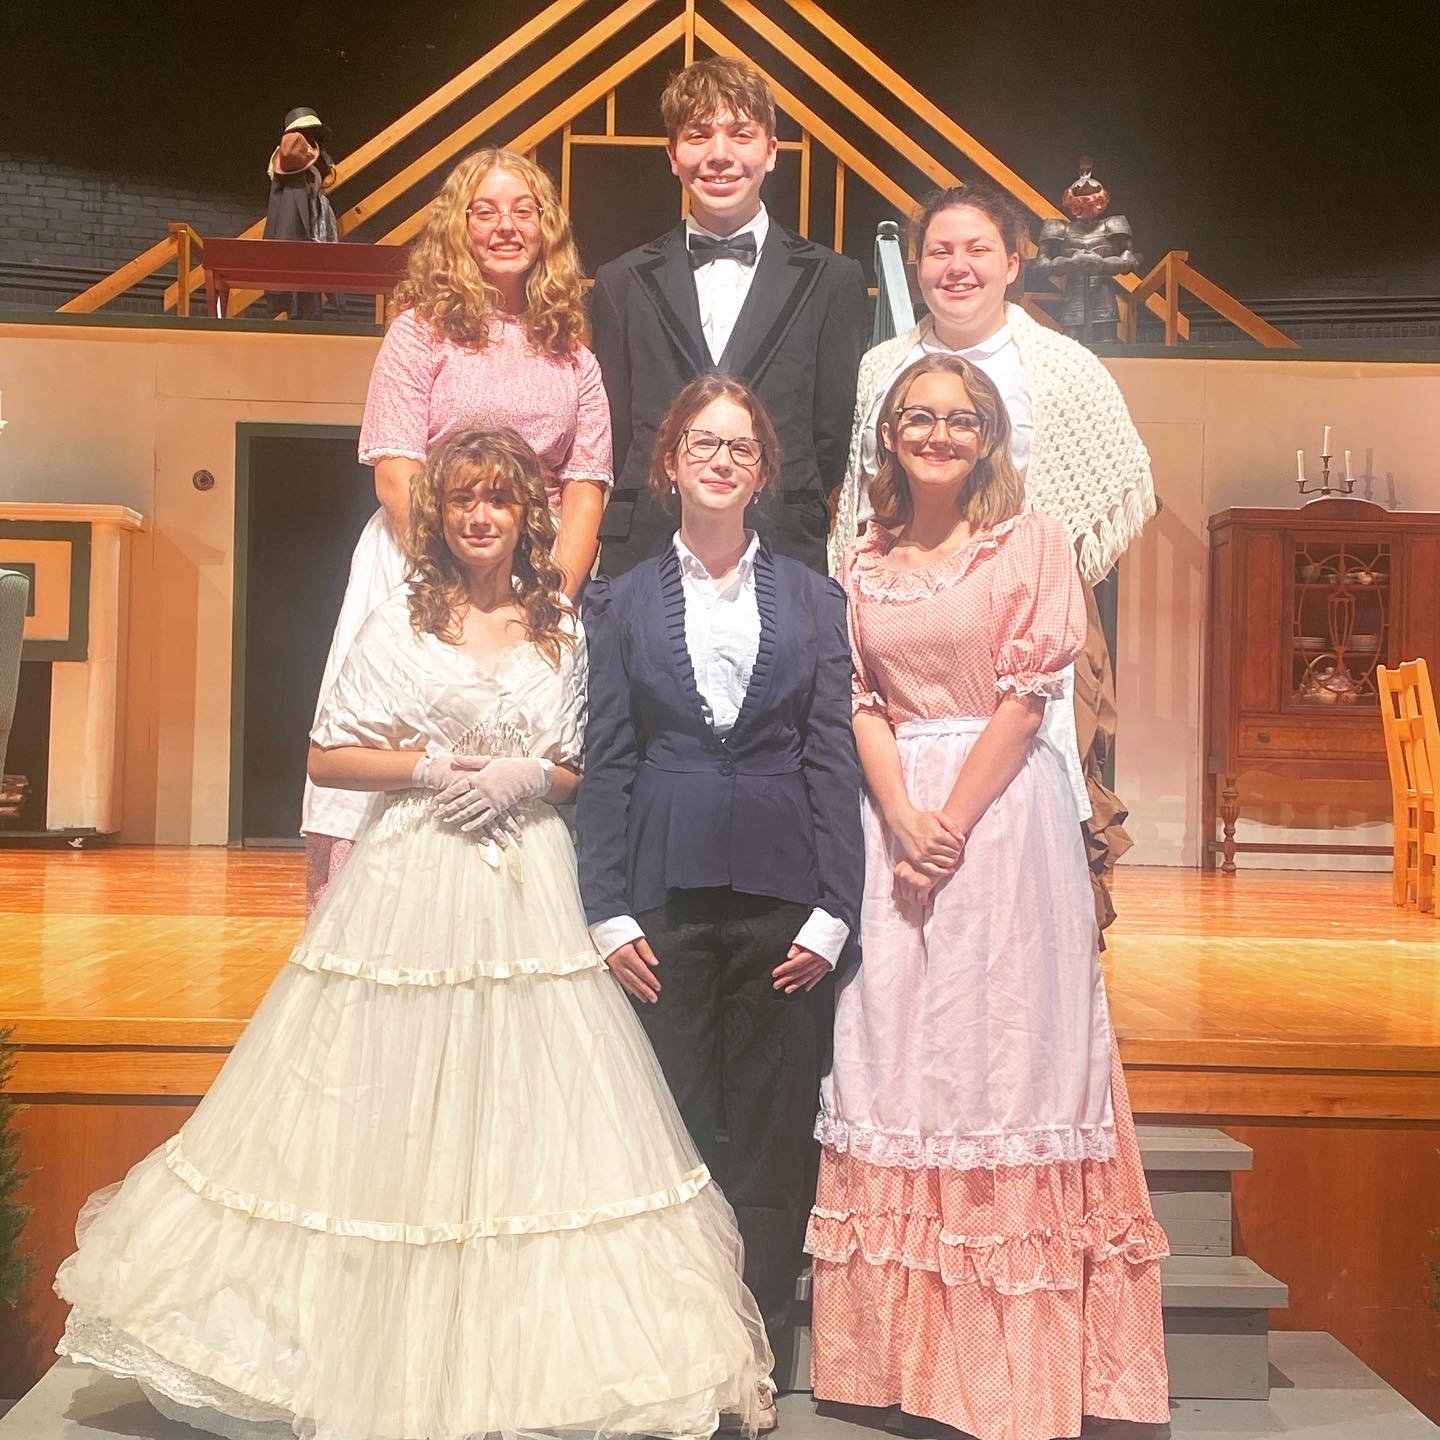 Cast members invite the public to the Camden High School Drama Club’s performance of ‘Little Women’ at 7 p.m. Nov. 4 and 2 p.m. and 7:30 p.m. Nov. 5 in the school’s auditorium.